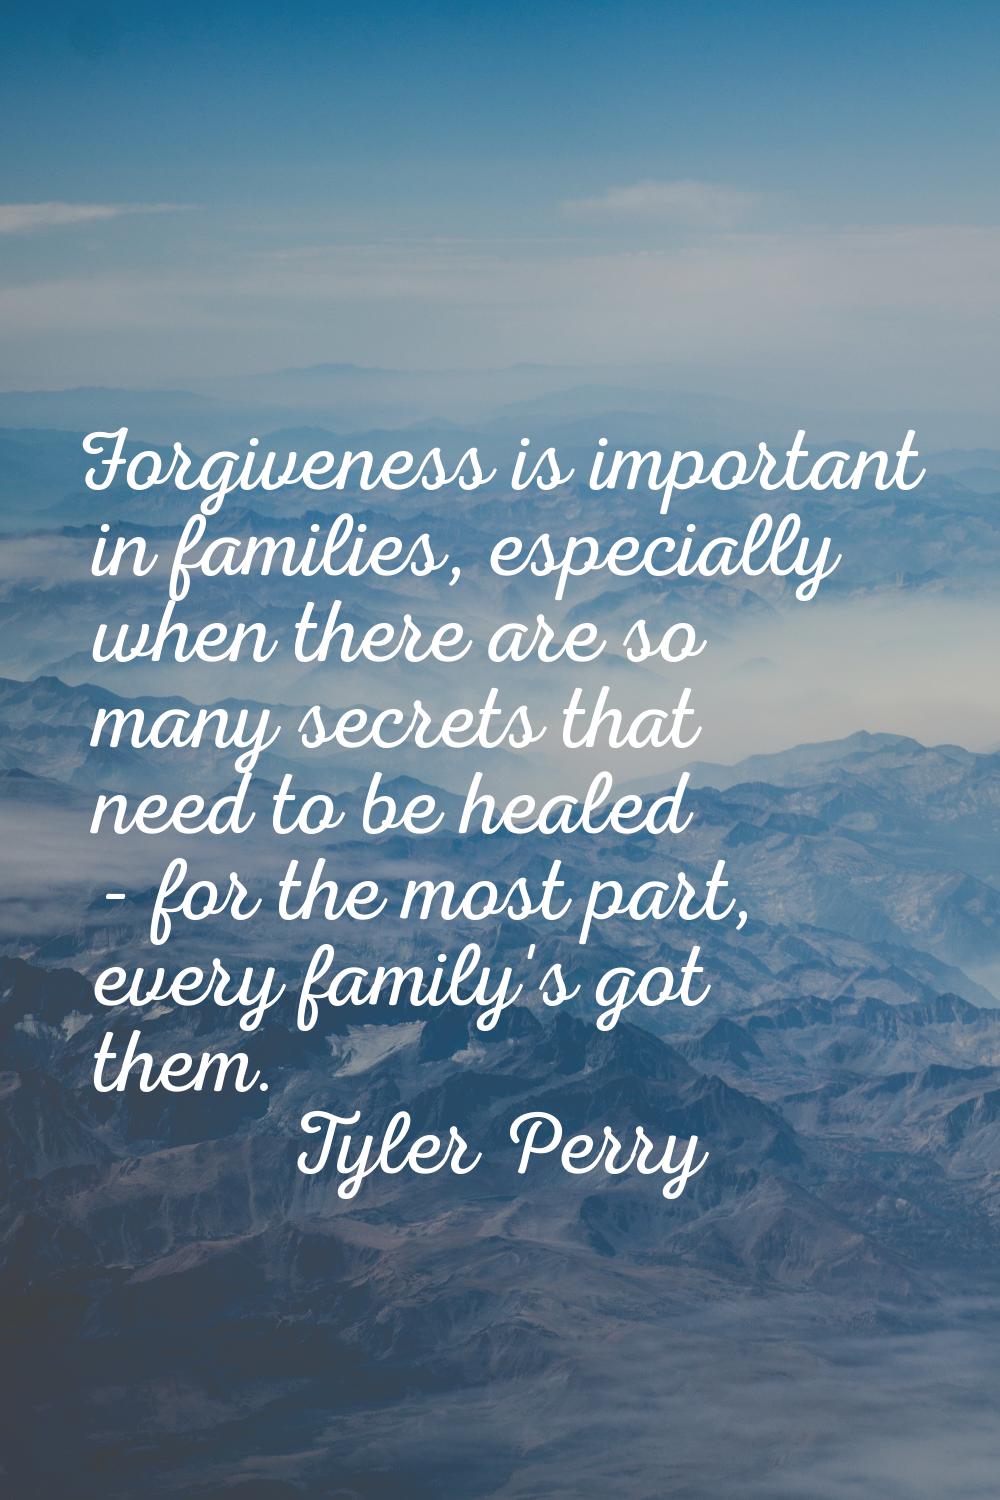 Forgiveness is important in families, especially when there are so many secrets that need to be hea